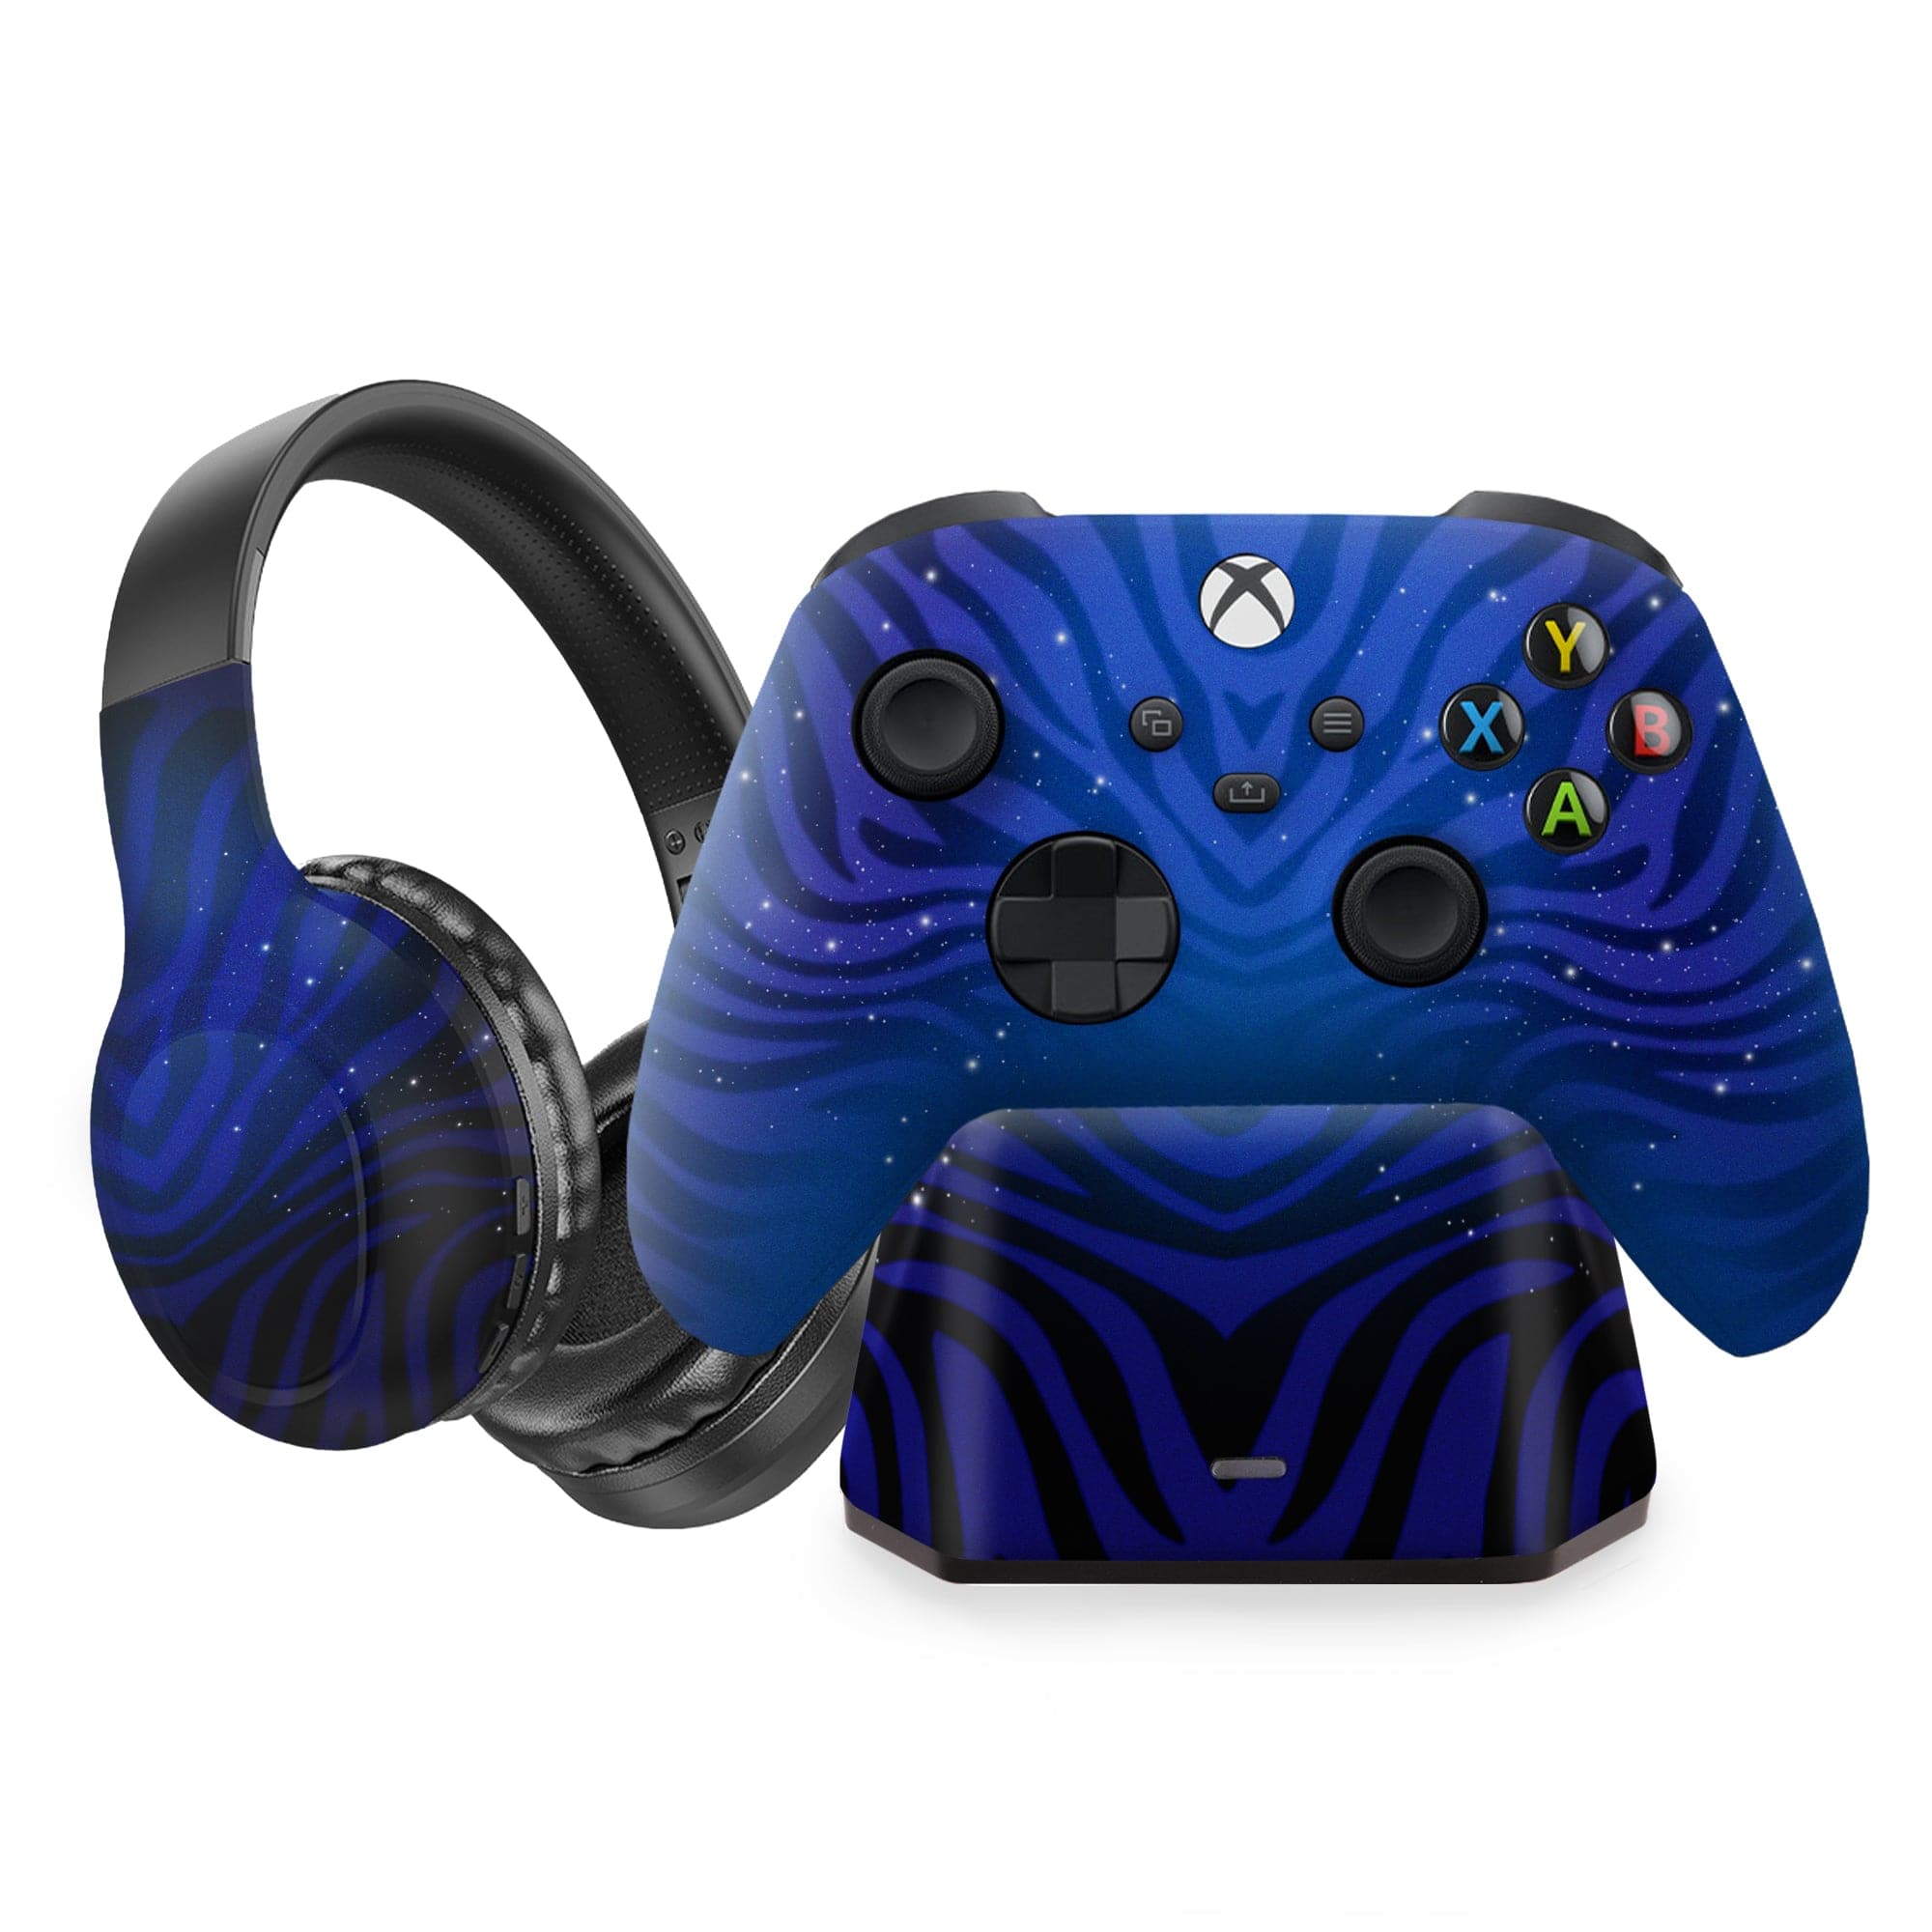 Avatar: The way of Water inspired Xbox Series X Modded Controller with Charging Station & Headphone